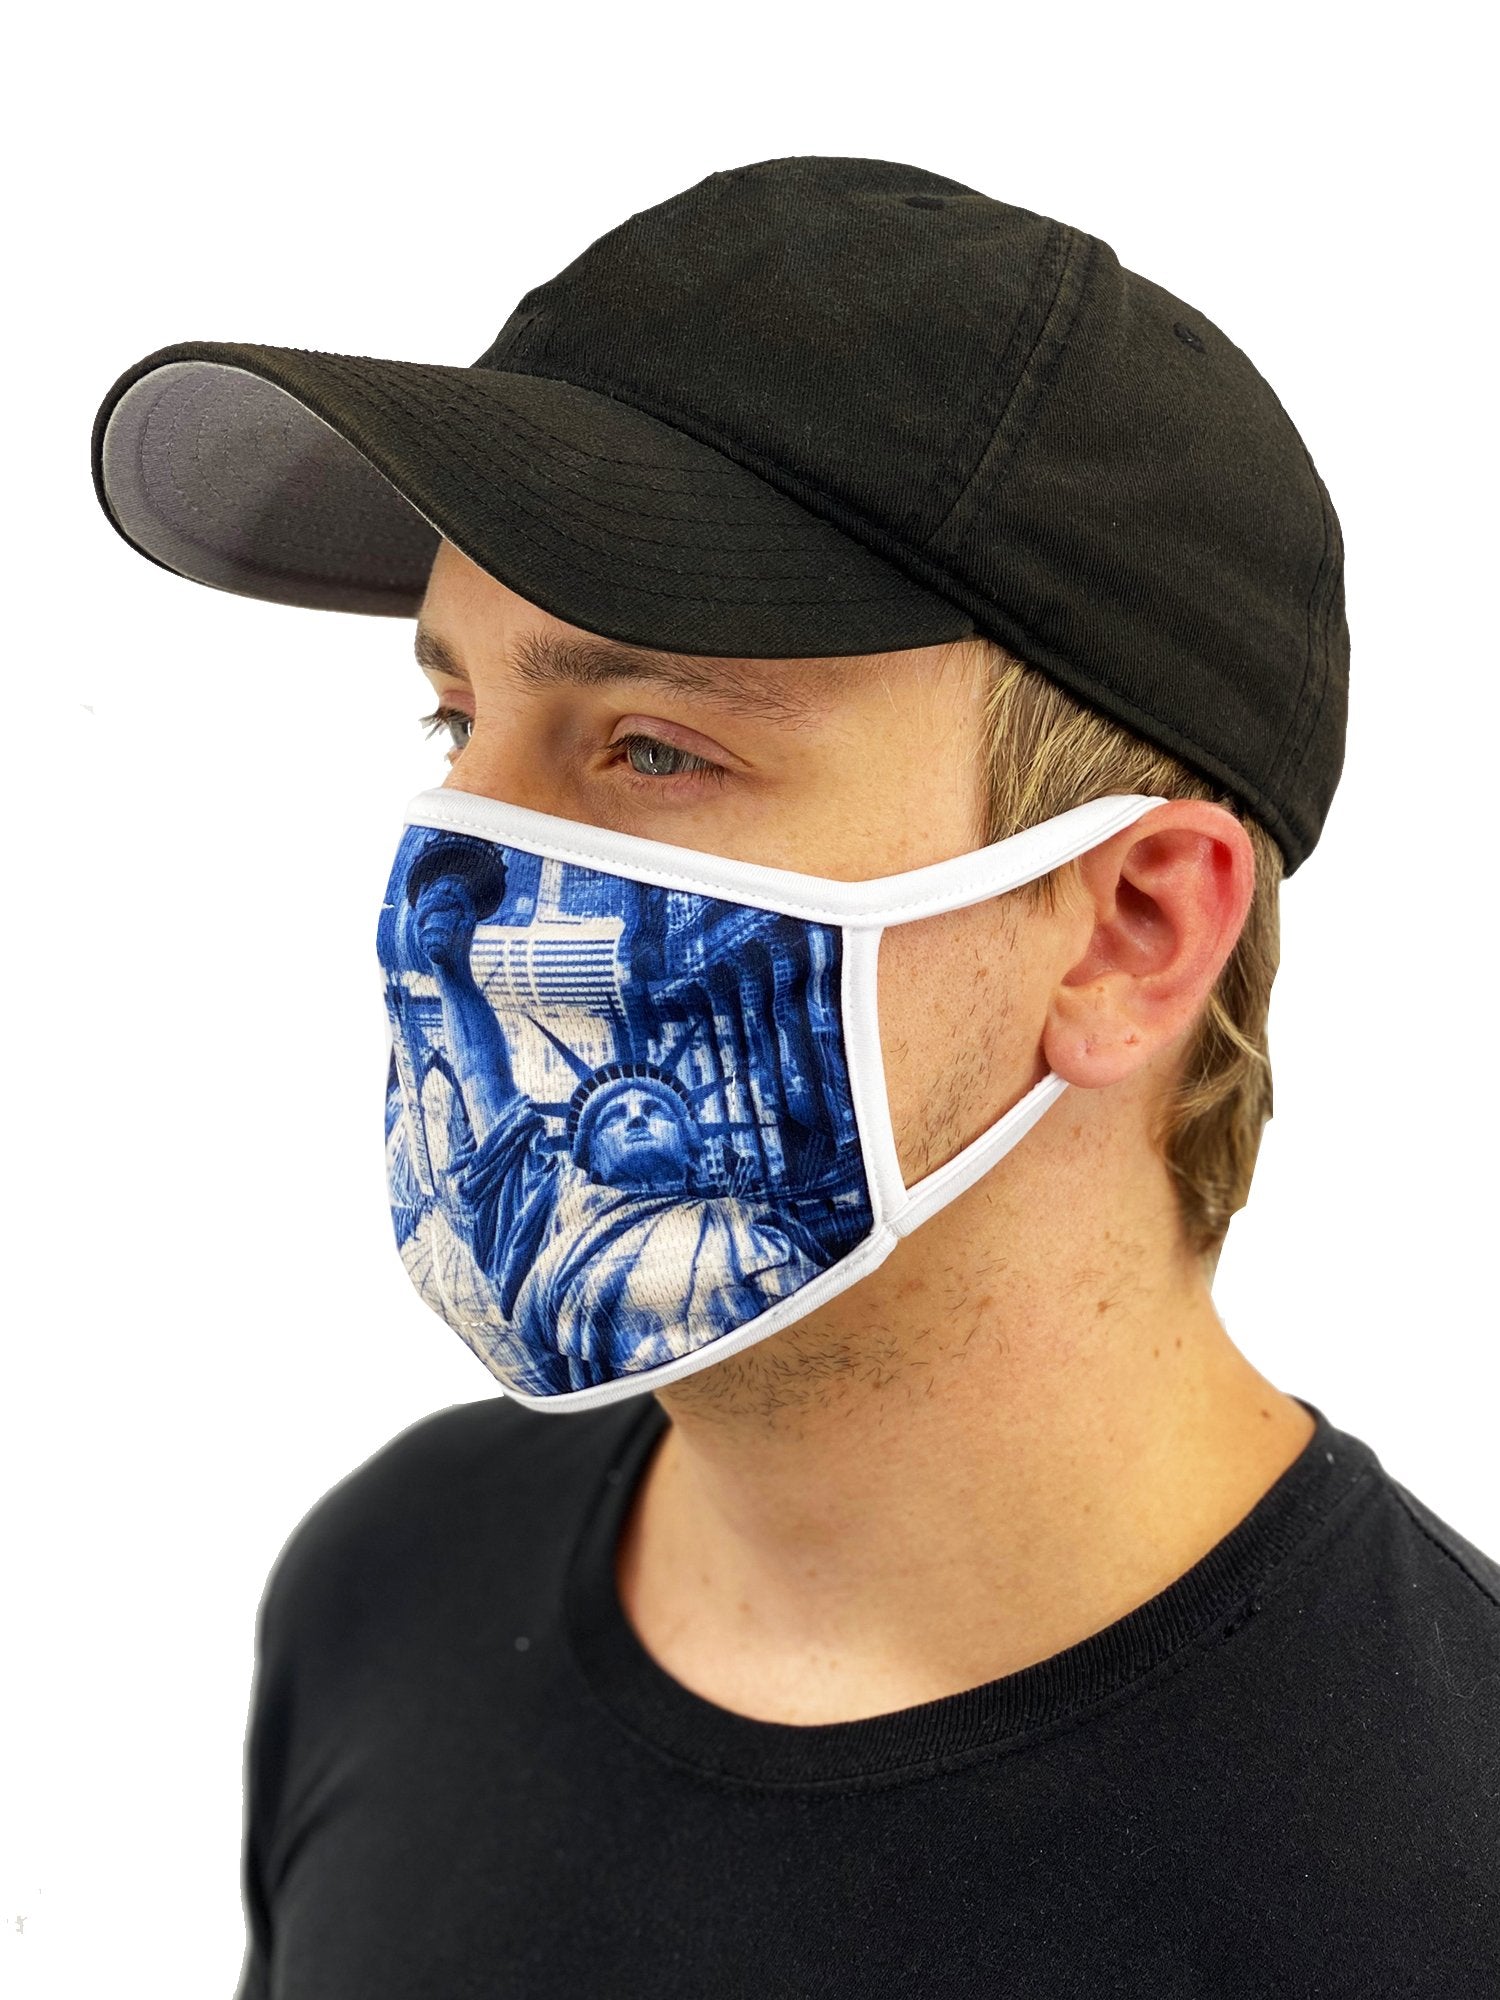 NYC Face Mask With Filter Pocket